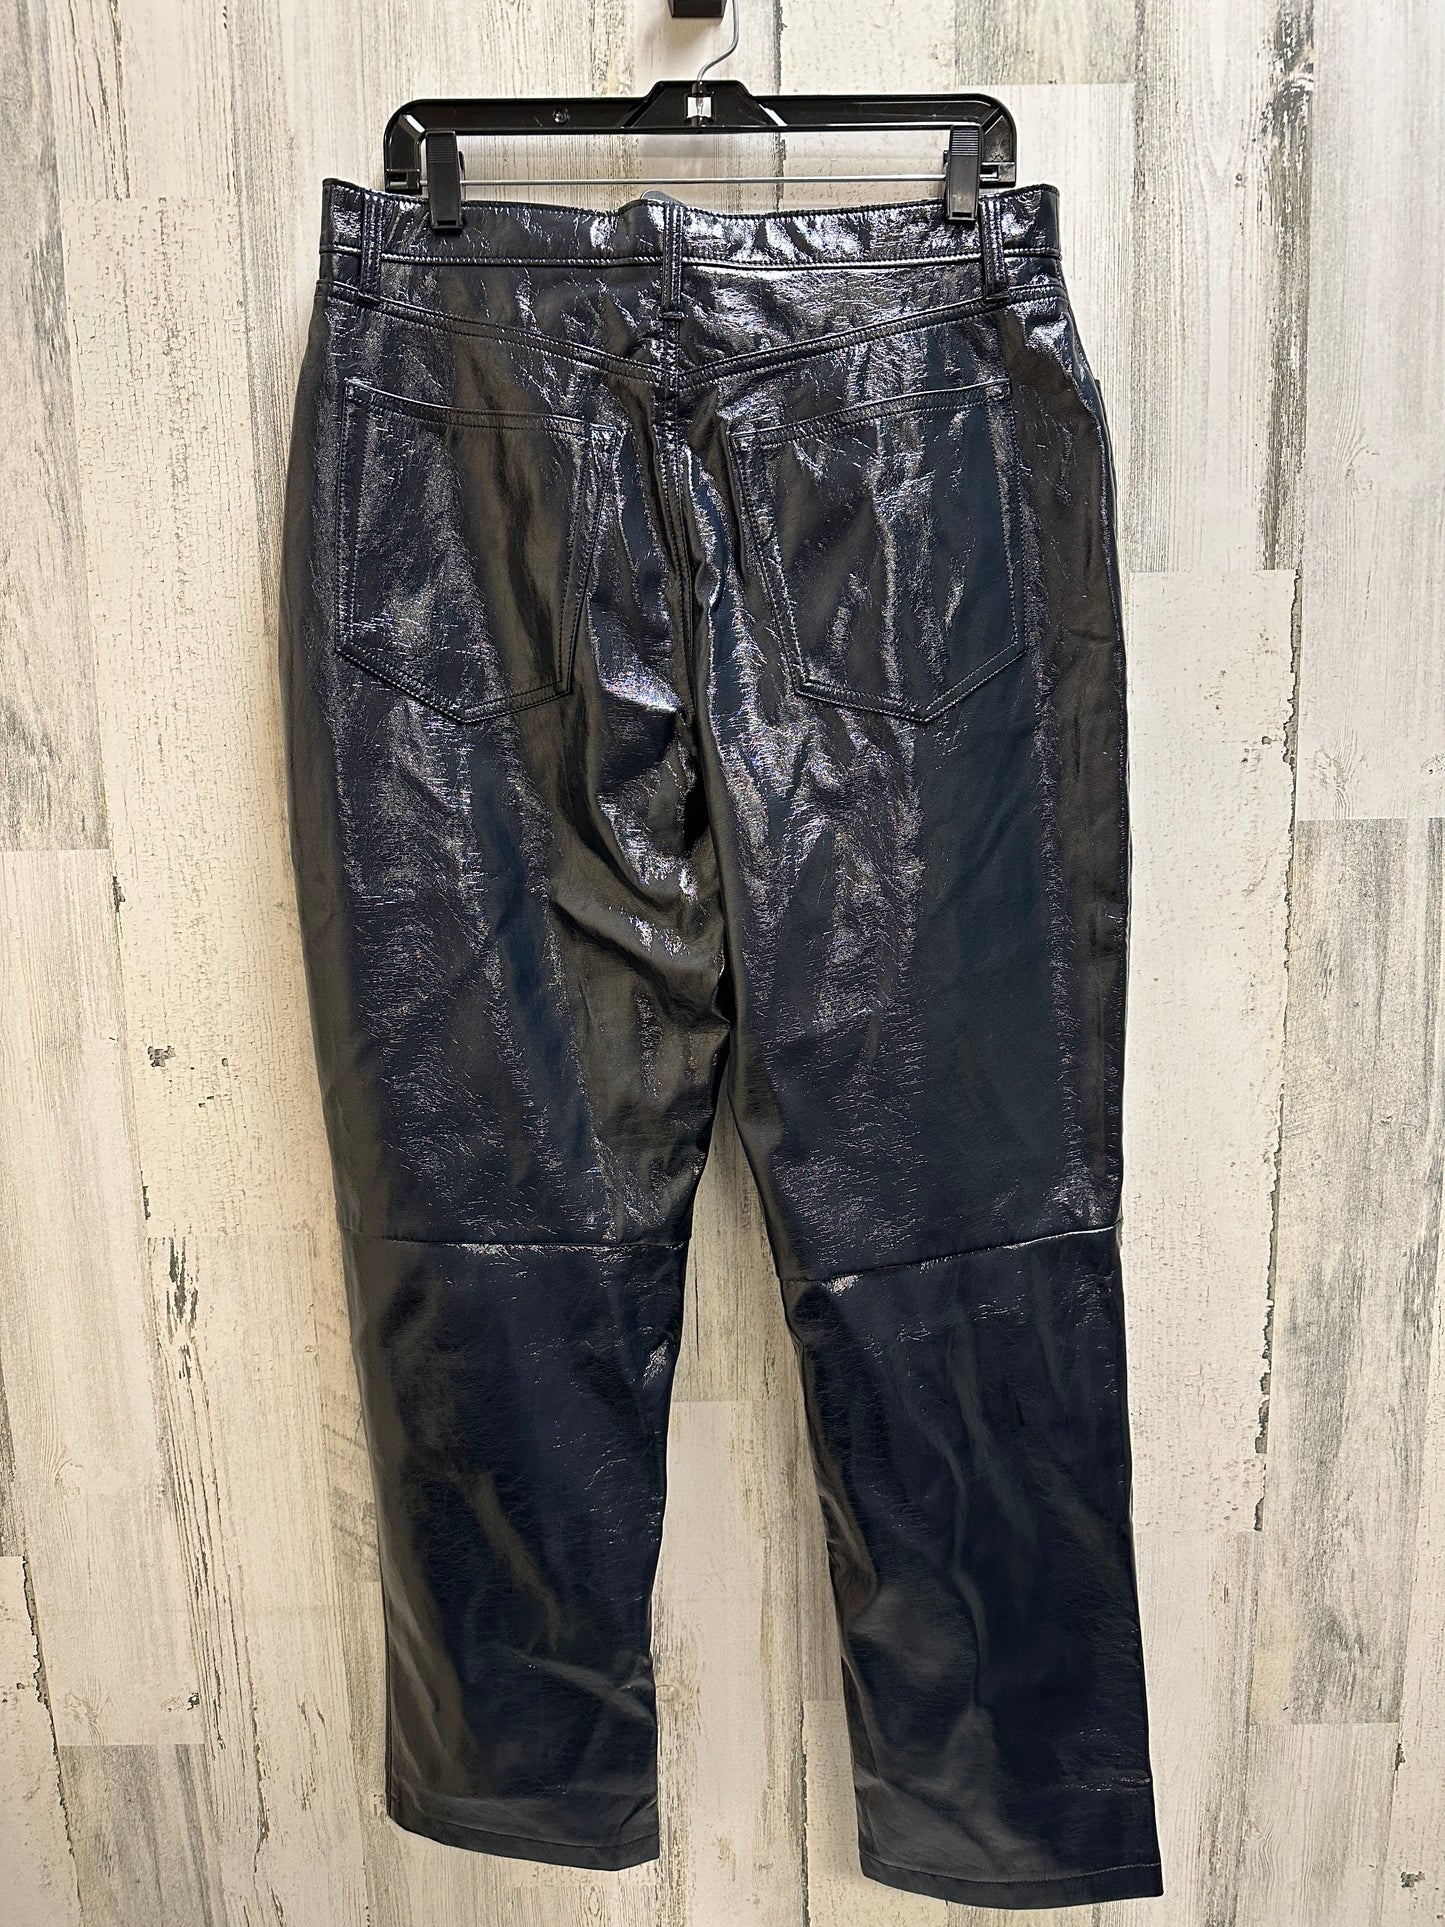 Pants Ankle By Abercrombie And Fitch  Size: 14